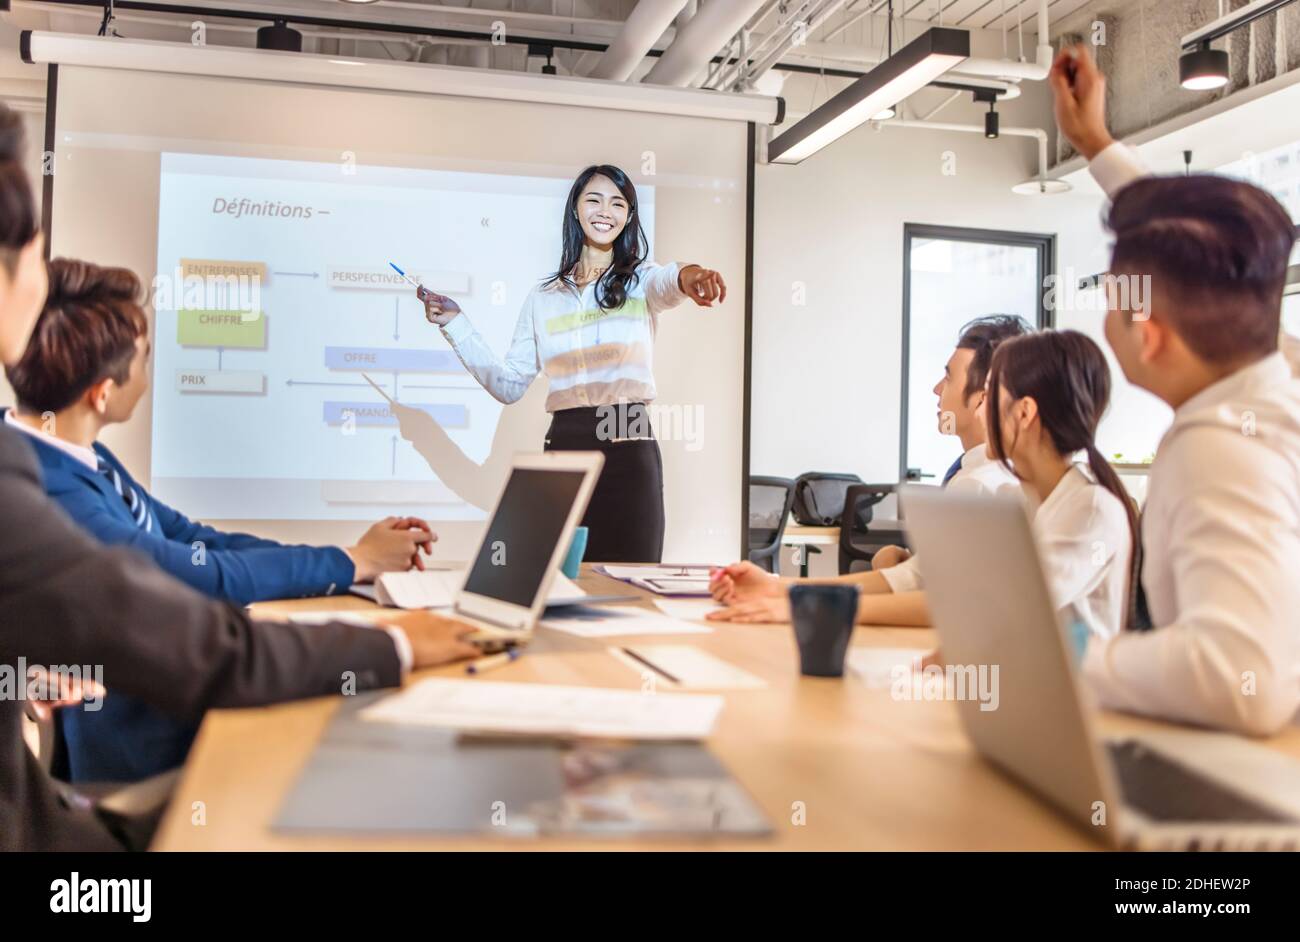 Business woman making  presentation in conference room Stock Photo